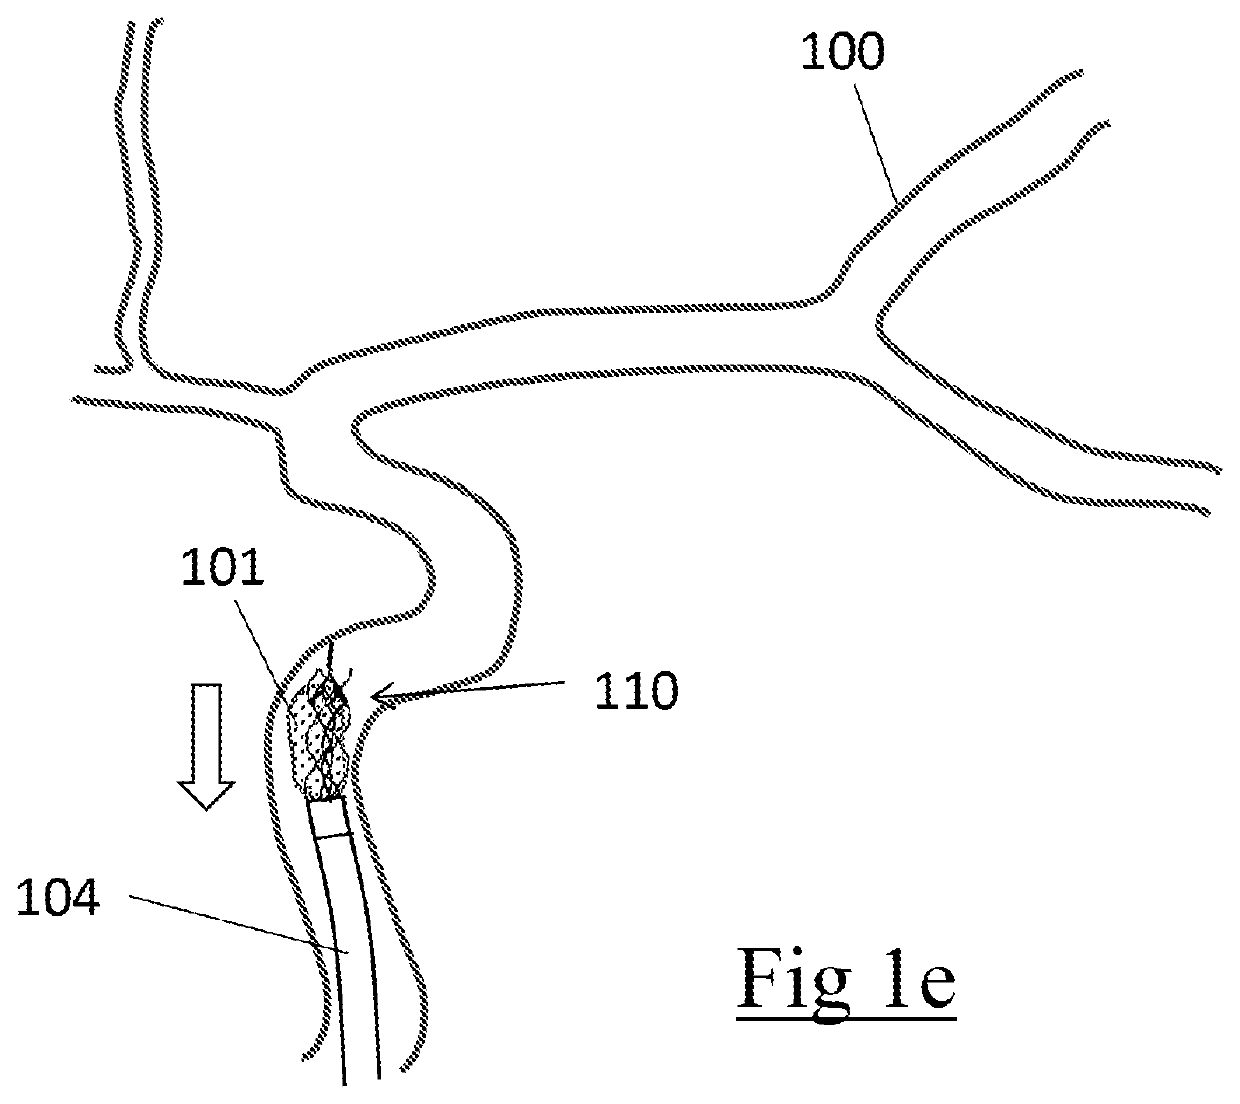 Clot retrieval device for removing clot from a blood vessel